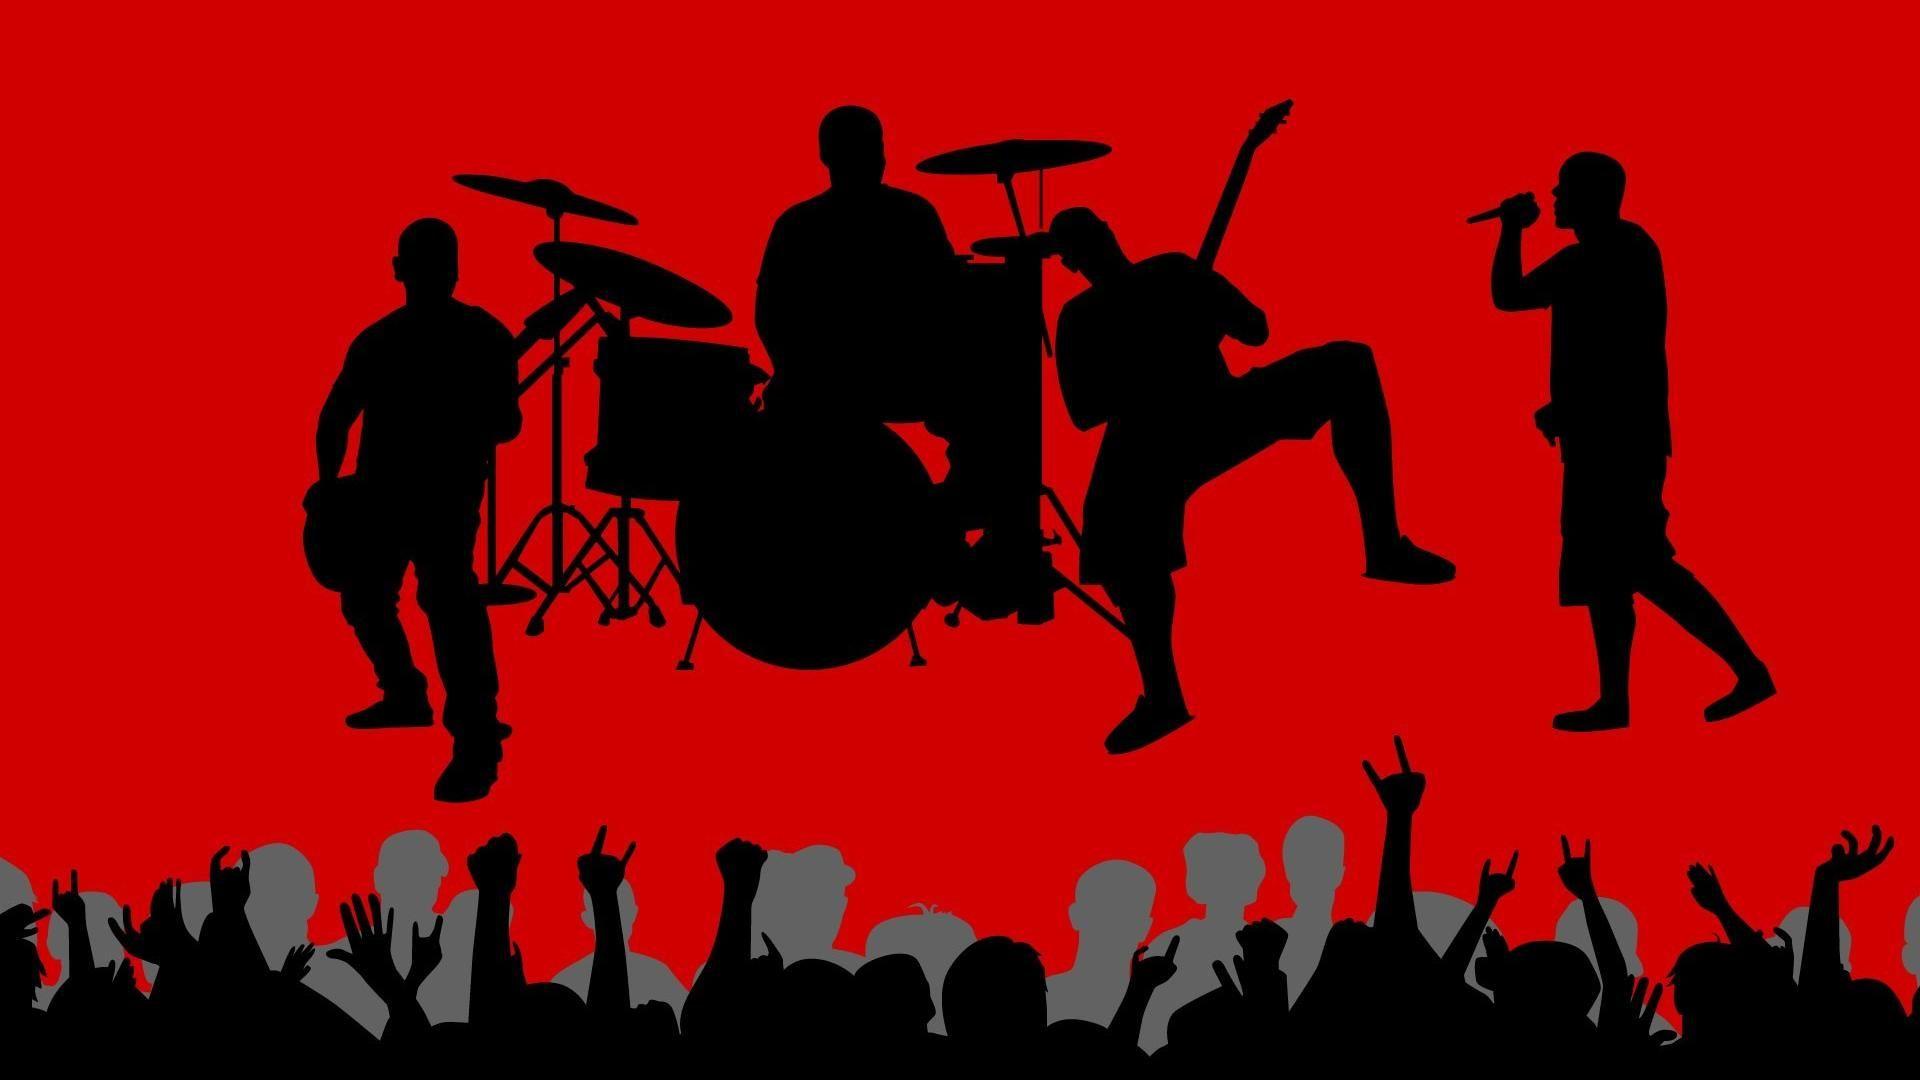 Music vector shadows crowd band red background wallpaper